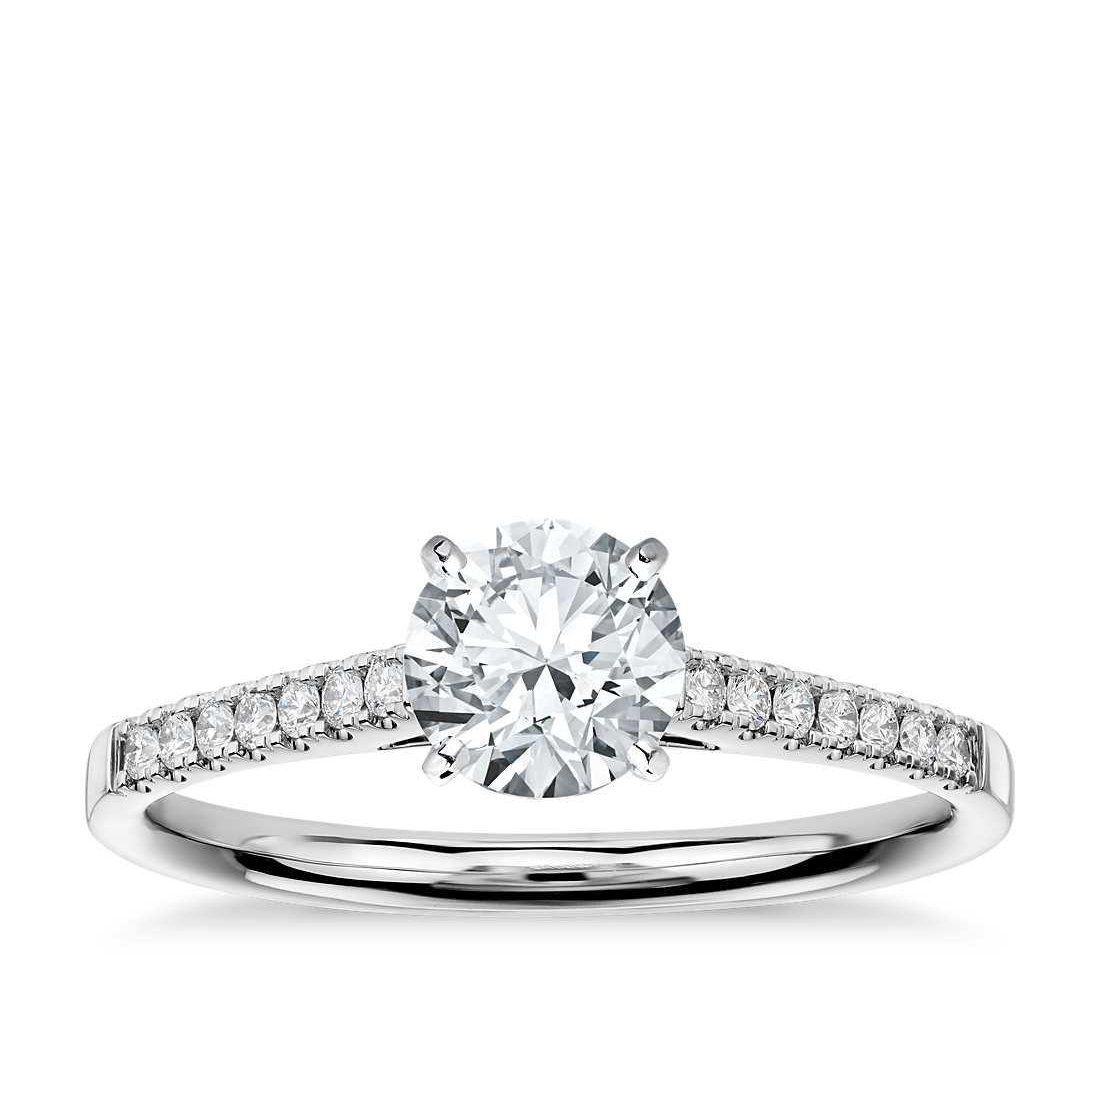 Picture of Harry Chad Enterprises 22279 1.35 CT Round Cut Diamond Solitaire Anniversary Ring with Accents, Size 6.5